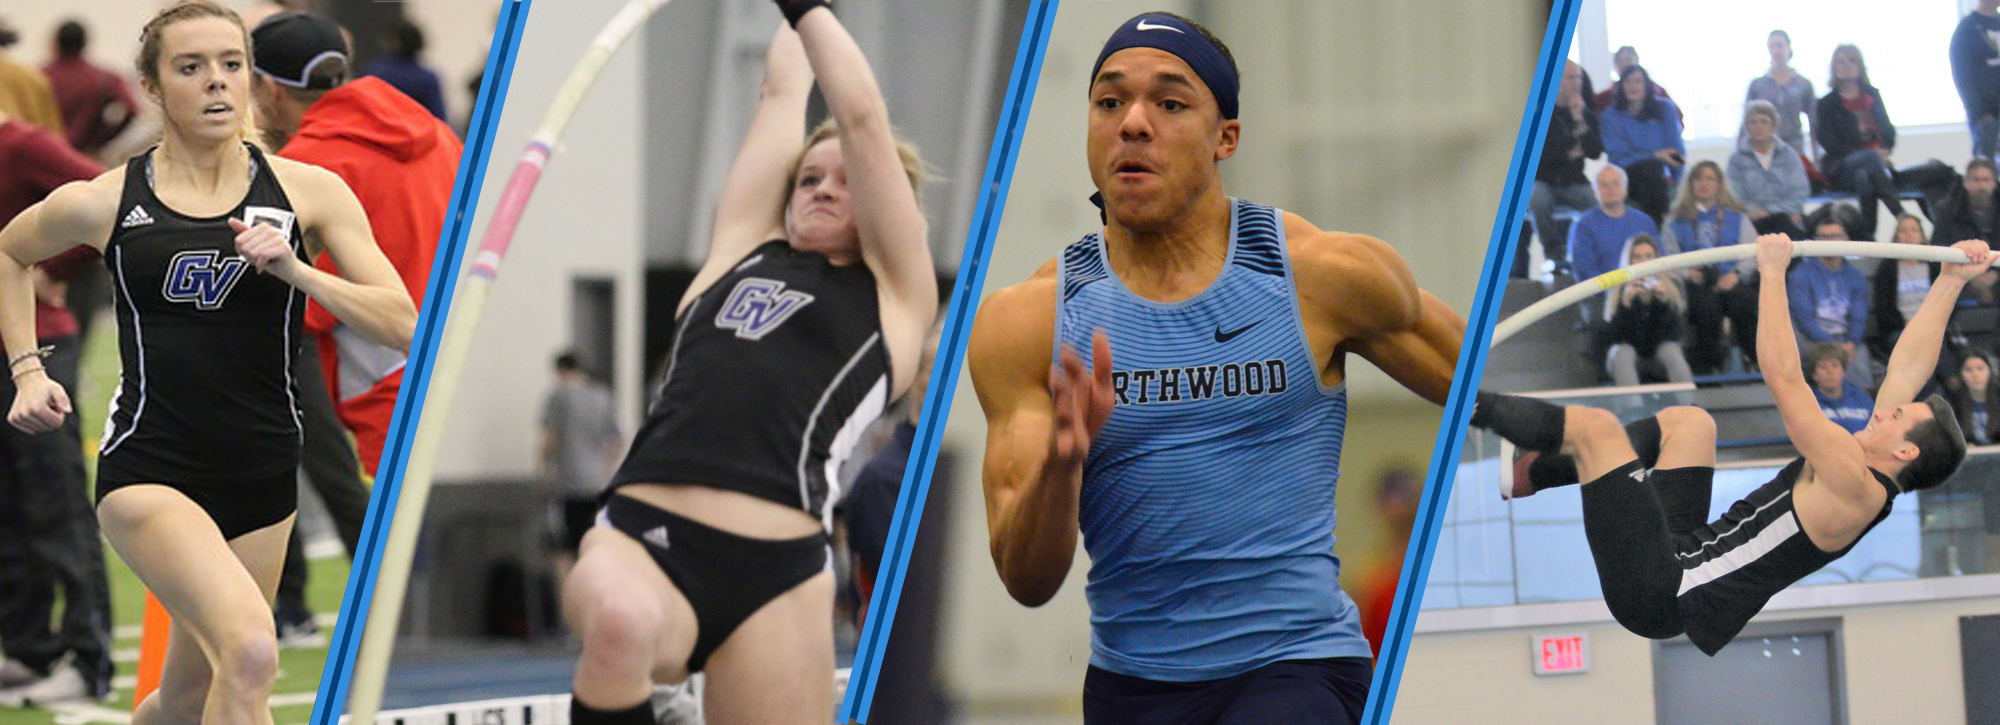 GVSU's Walters, Kimes and Battani, and Northwood's Phillips are named track and field athletes of the week